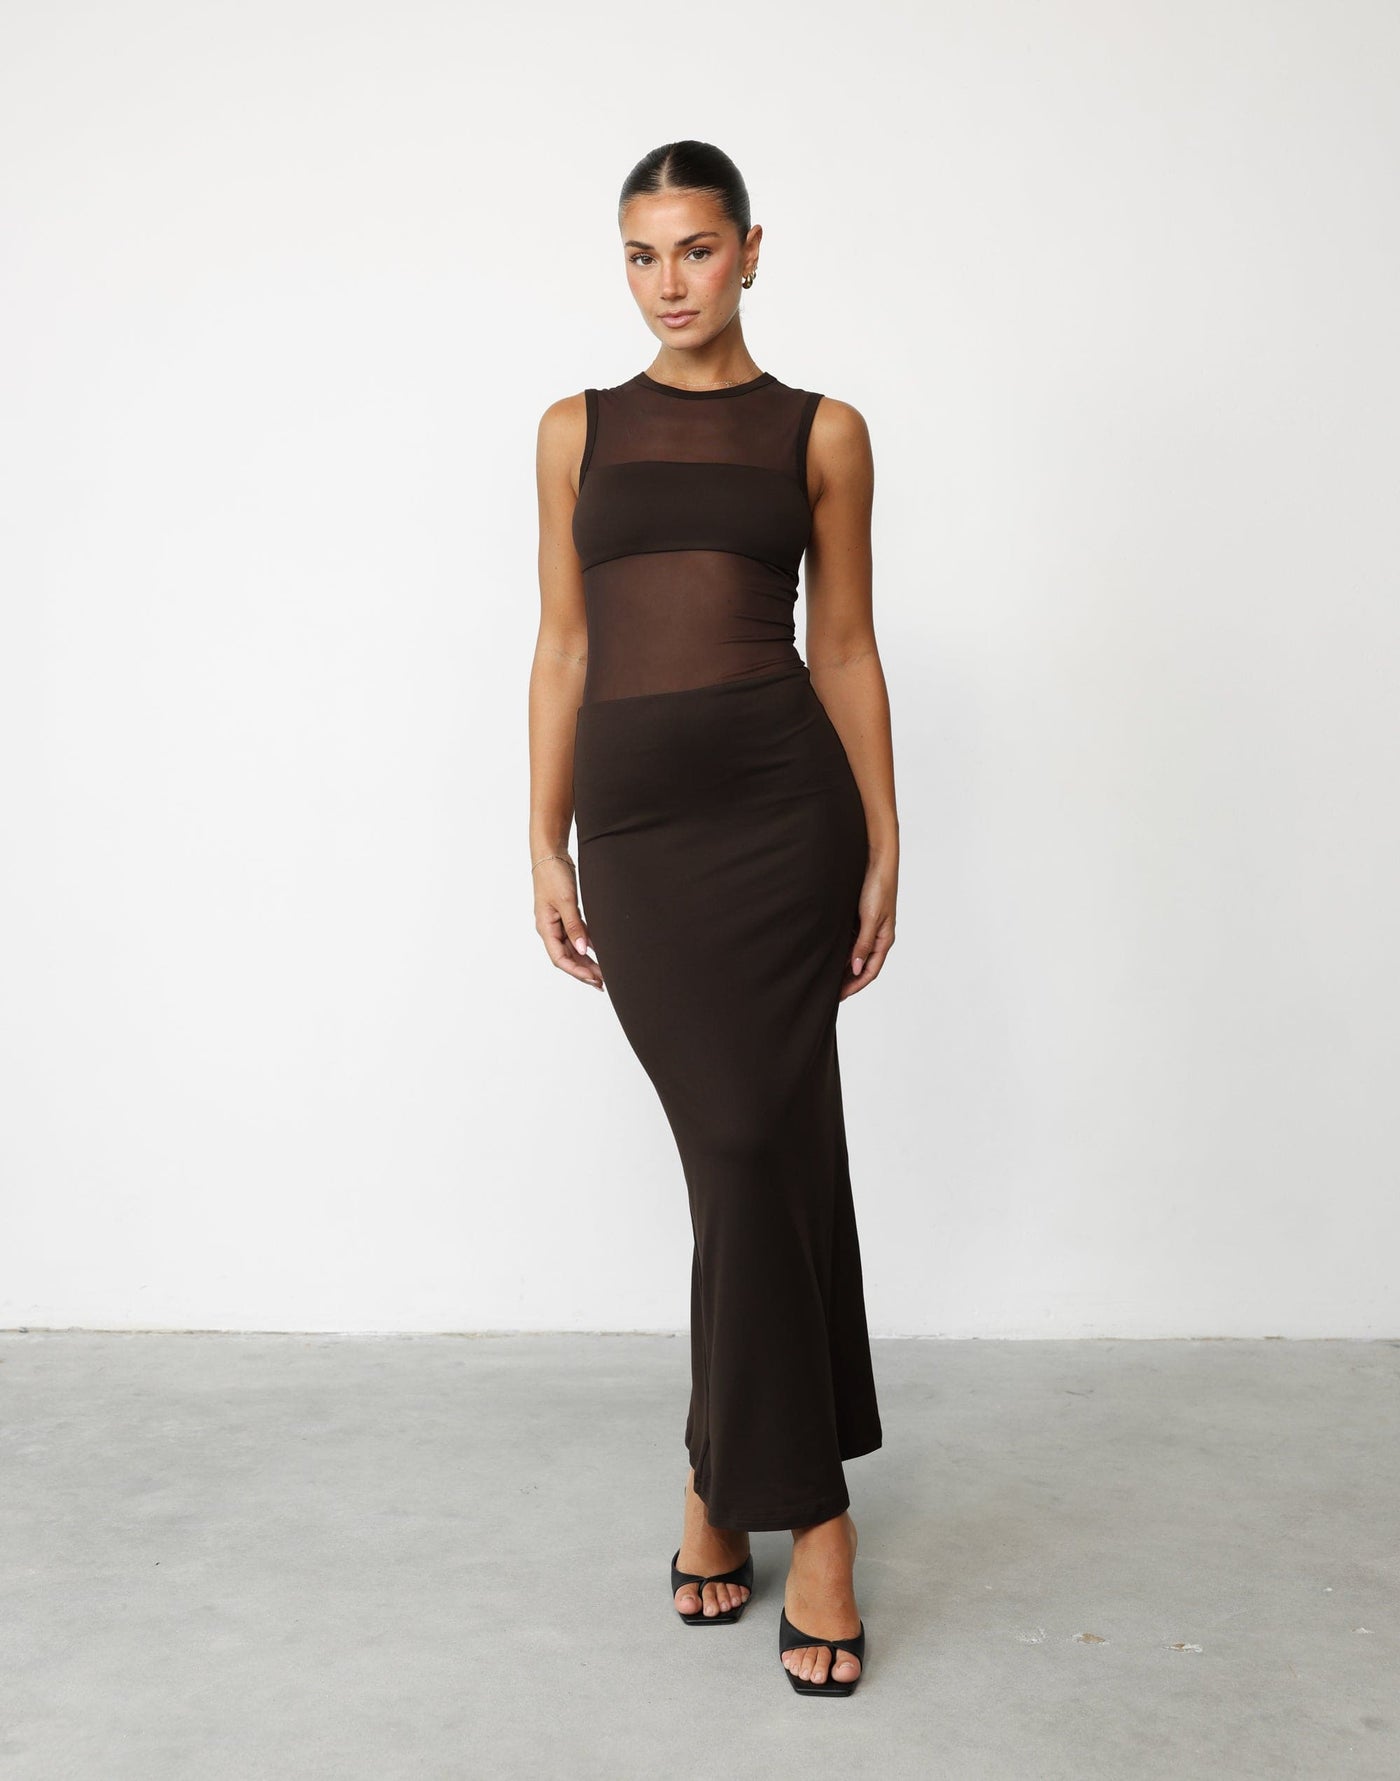 Cassius Maxi Dress (Chocolate) | CHARCOAL Exclusive - Sheer Upper with Jersey Bust Panel Maxi Dress - Women's Dress - Charcoal Clothing